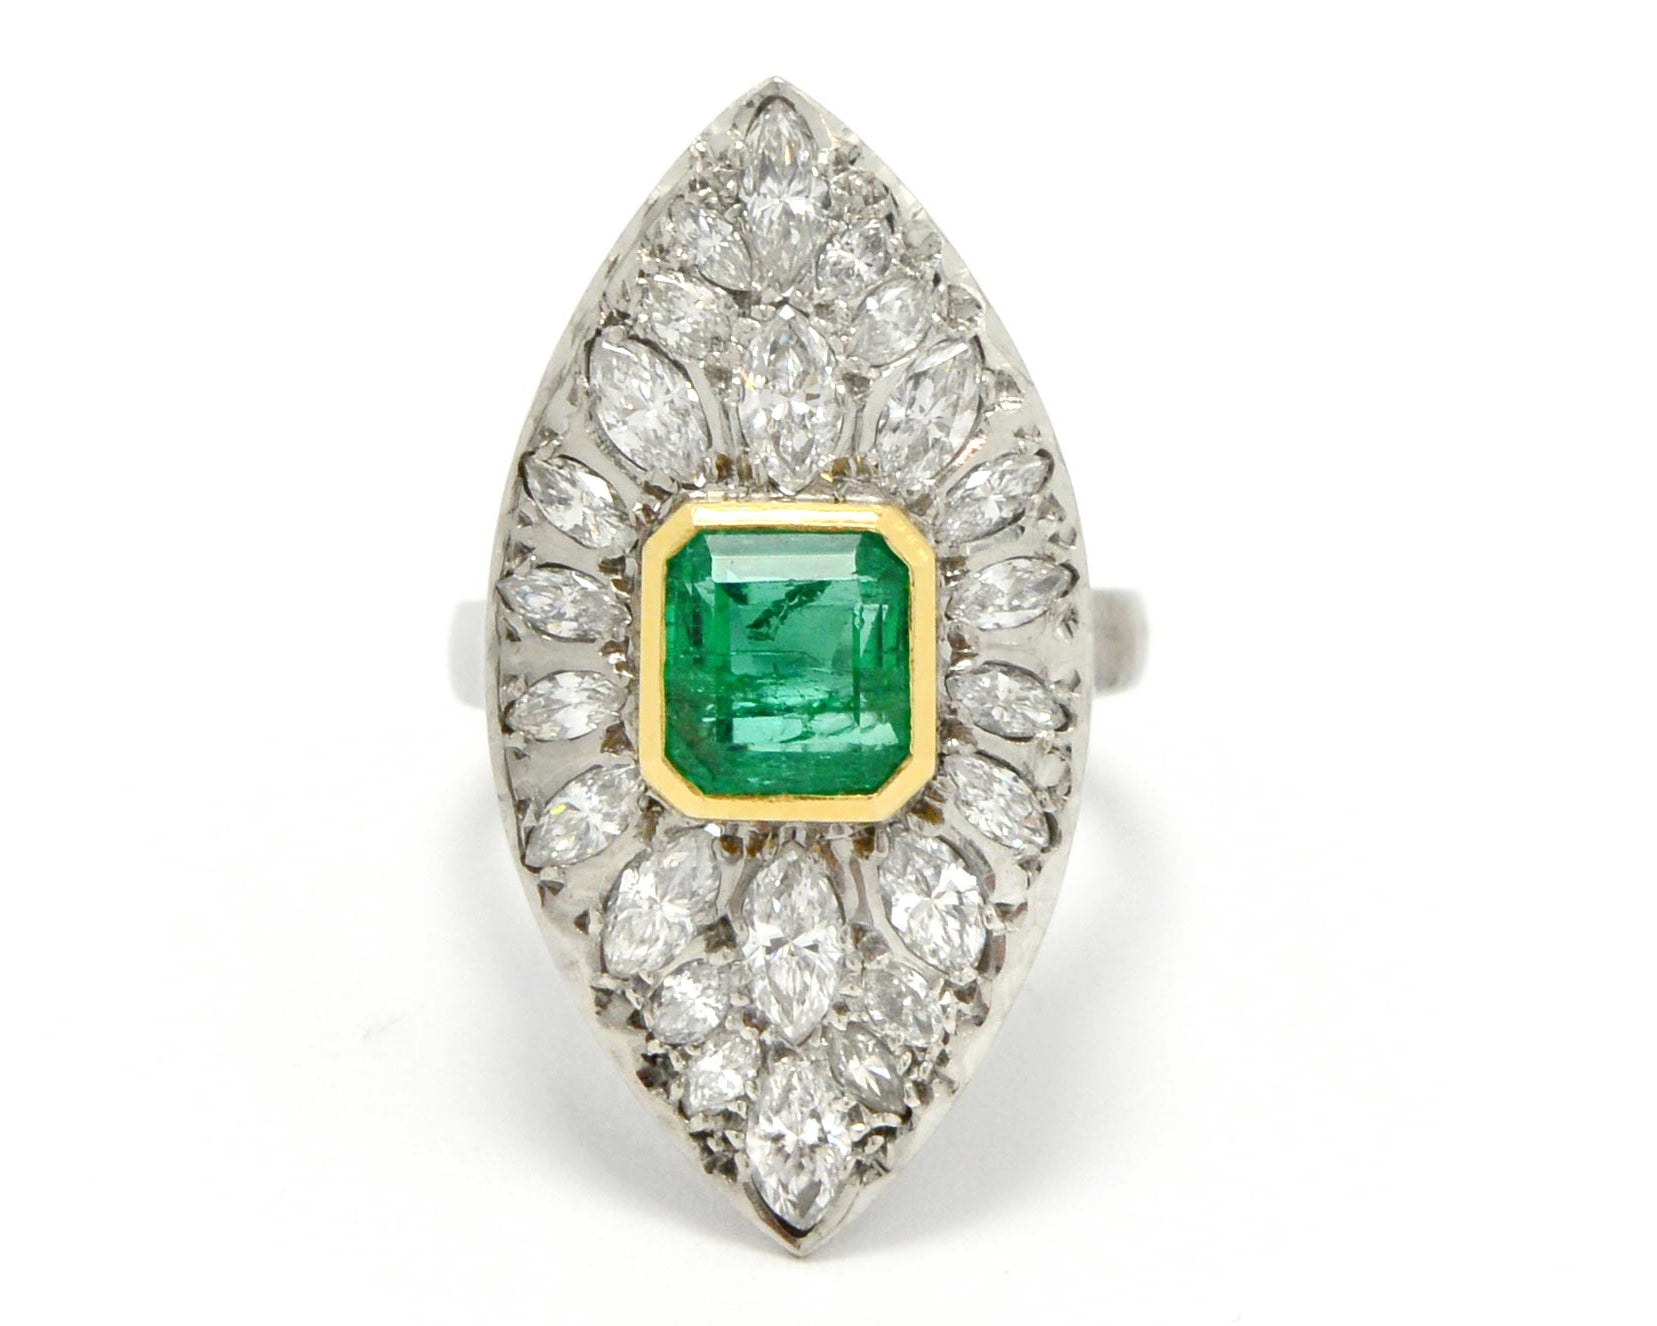 A stunning retro era estate cluster ring featuring a 2 carat Colombian emerald.